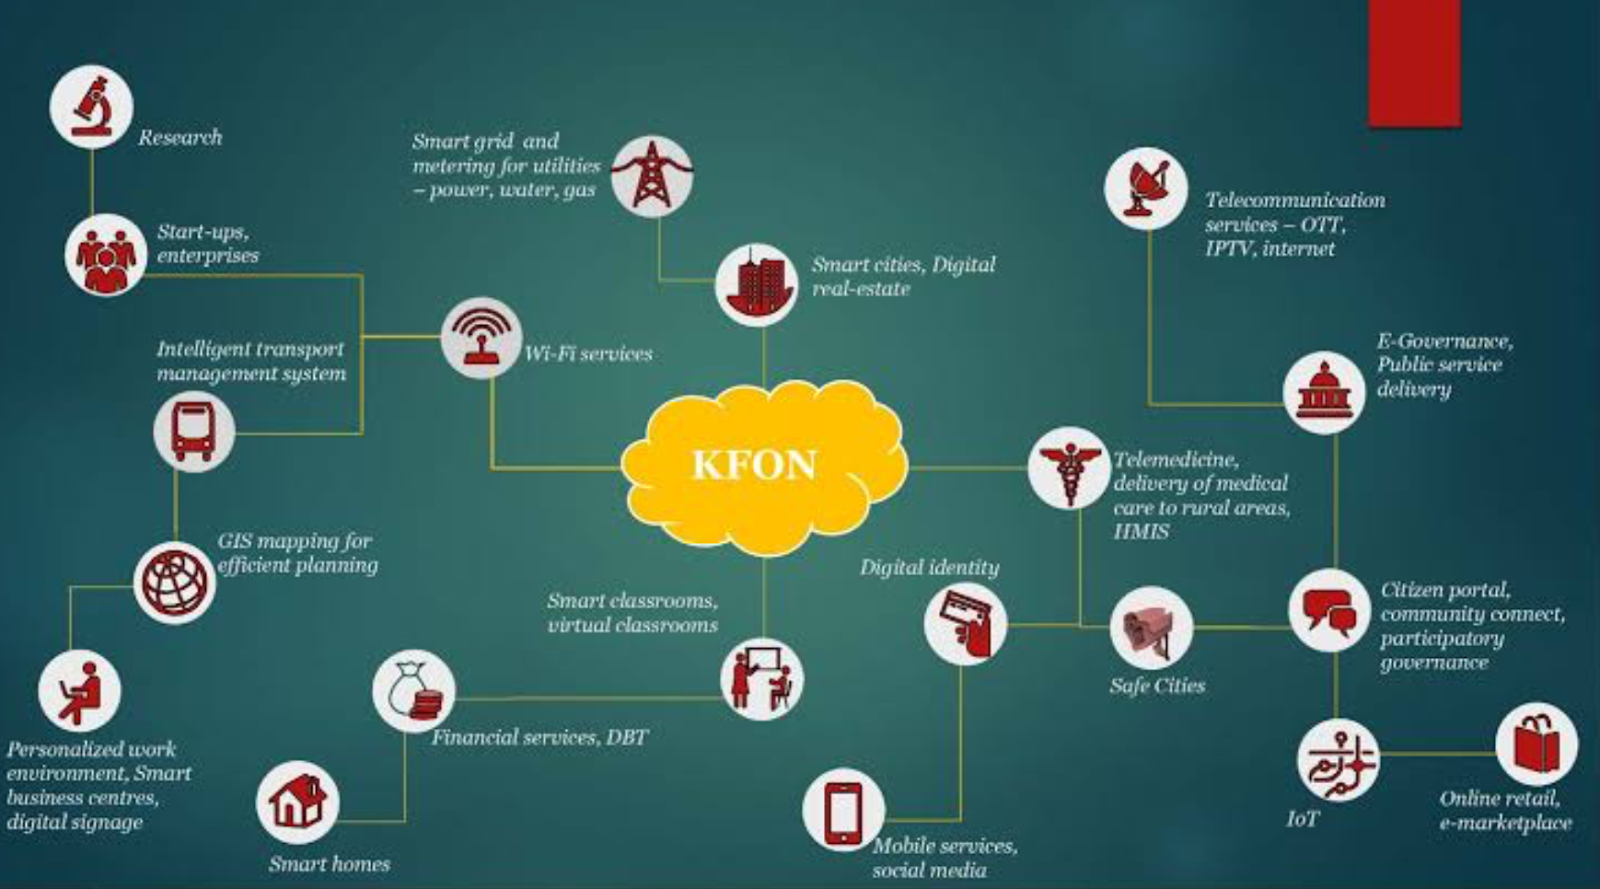 Kerala Launches KFON : State's Own Internet!  - Asiana Times